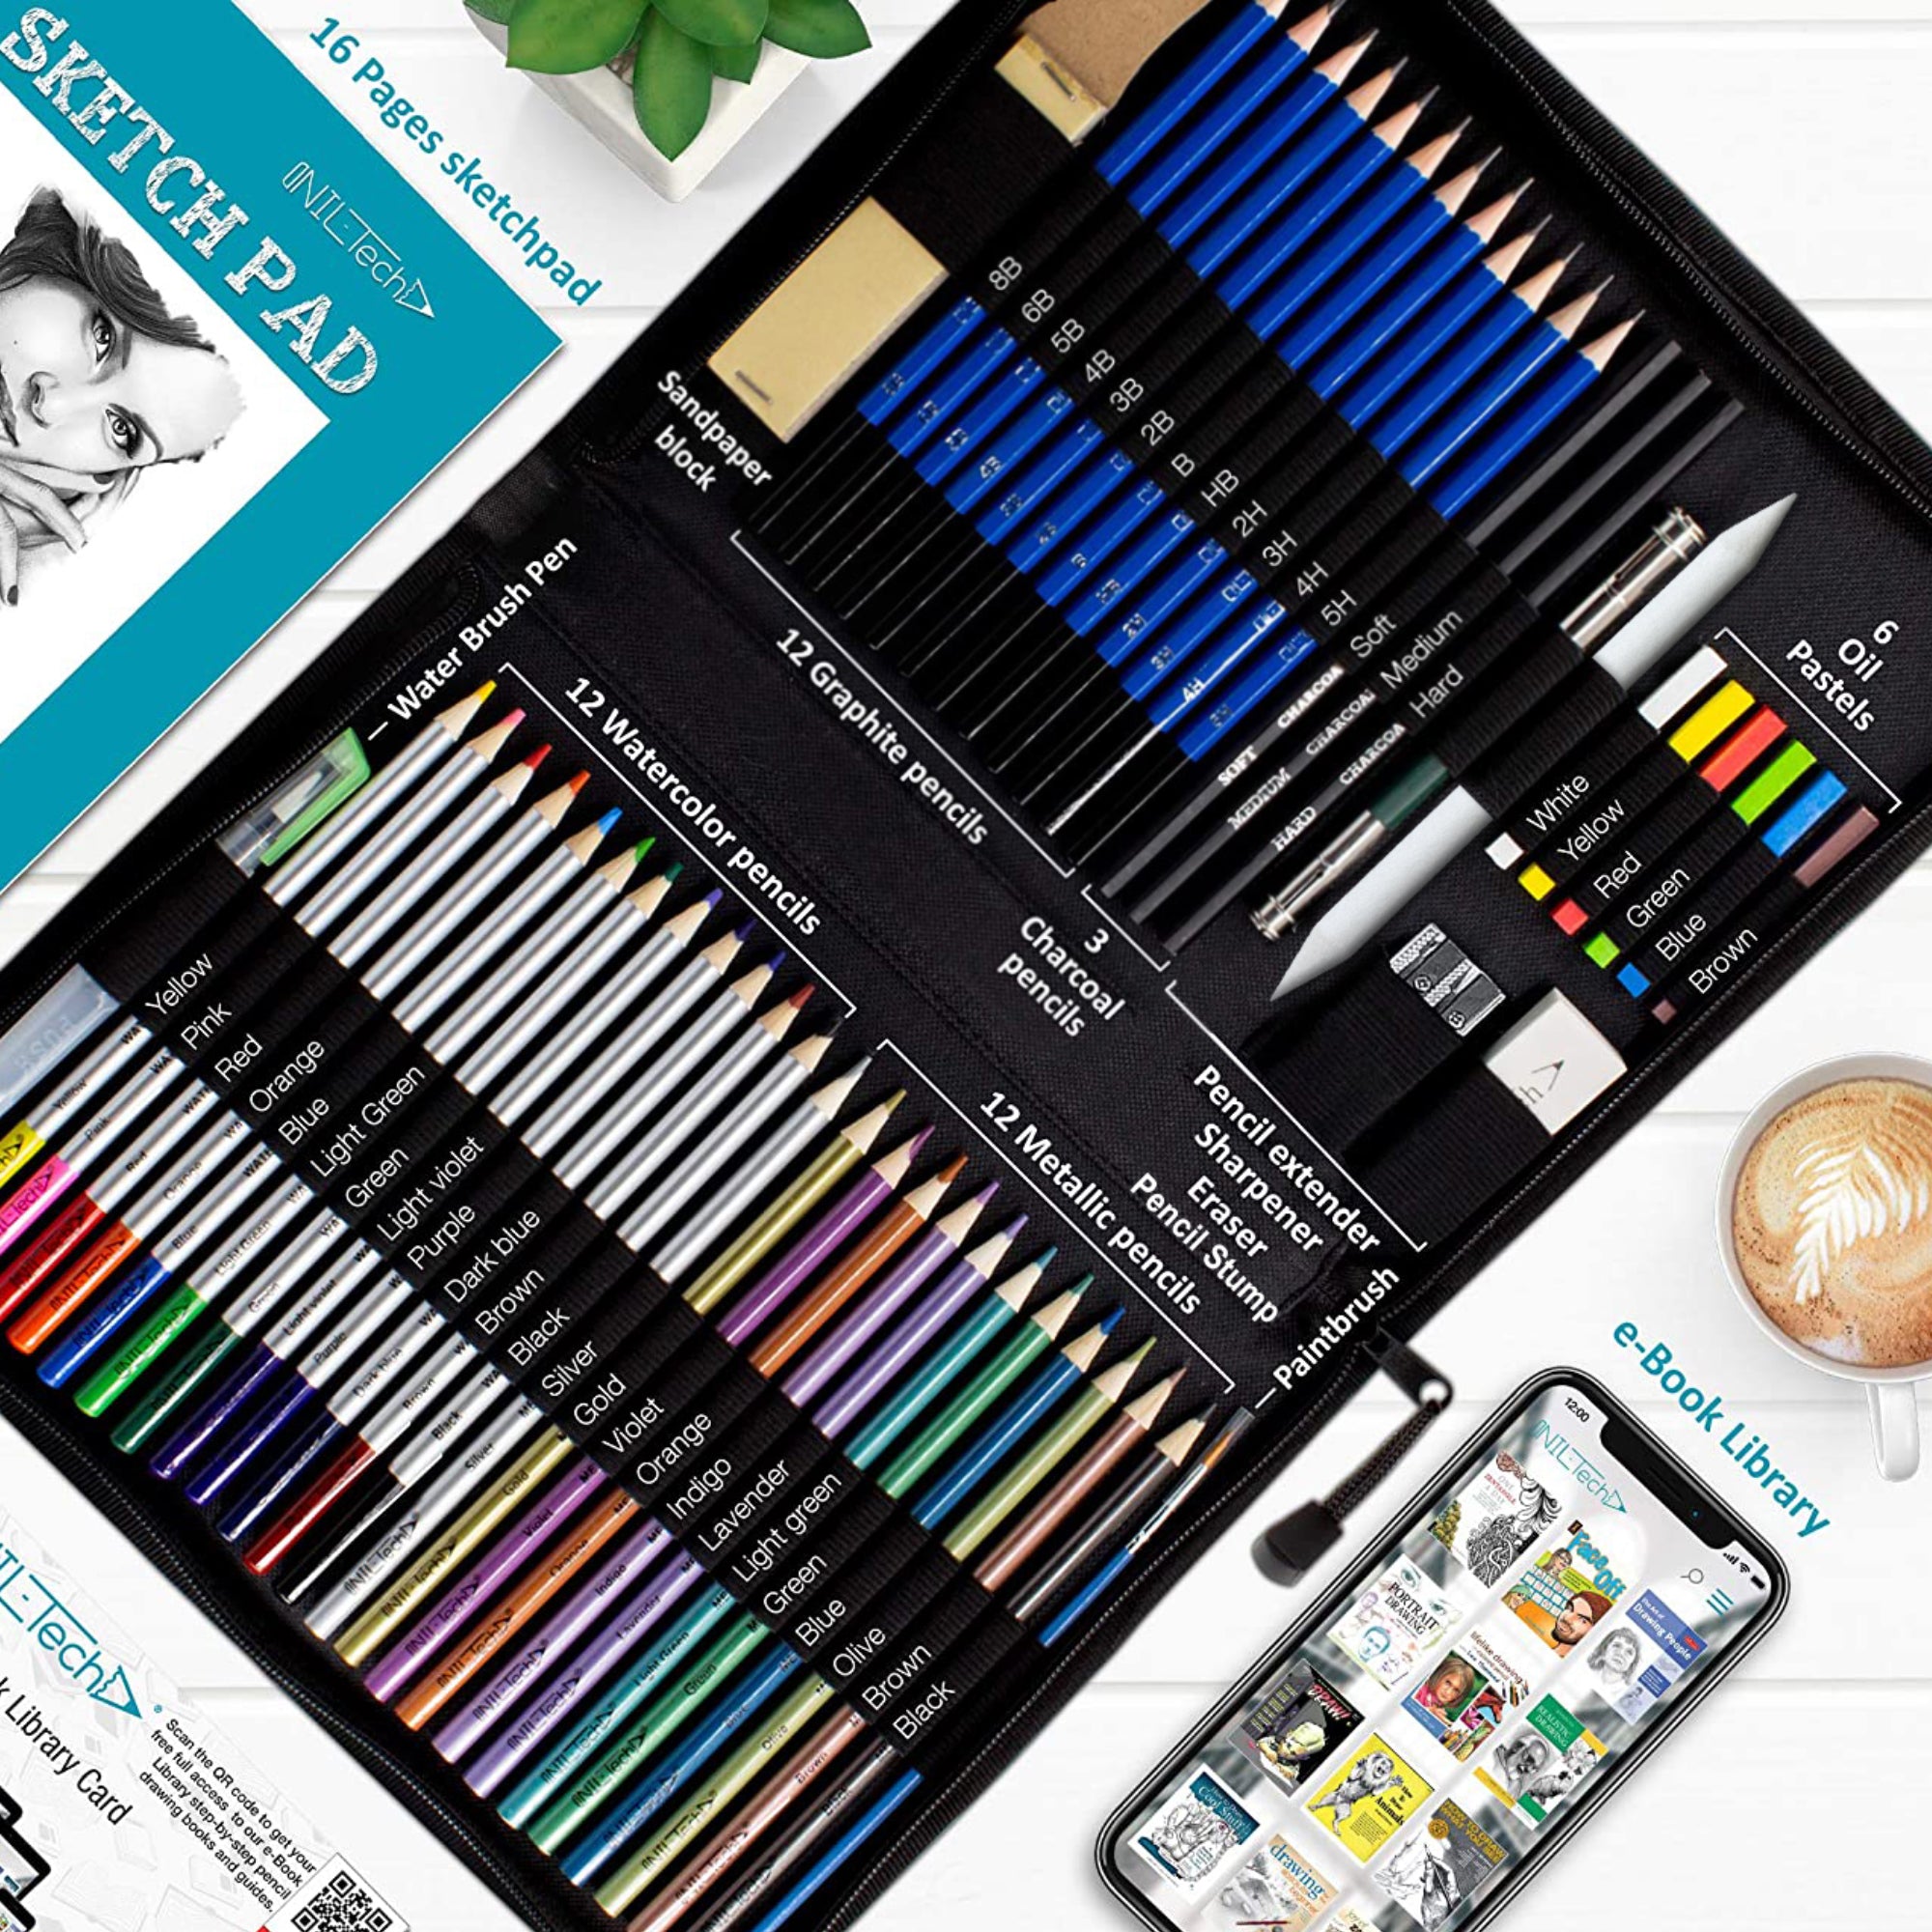 Holbein Colored Pencils Review - Barb Sotiropoulos